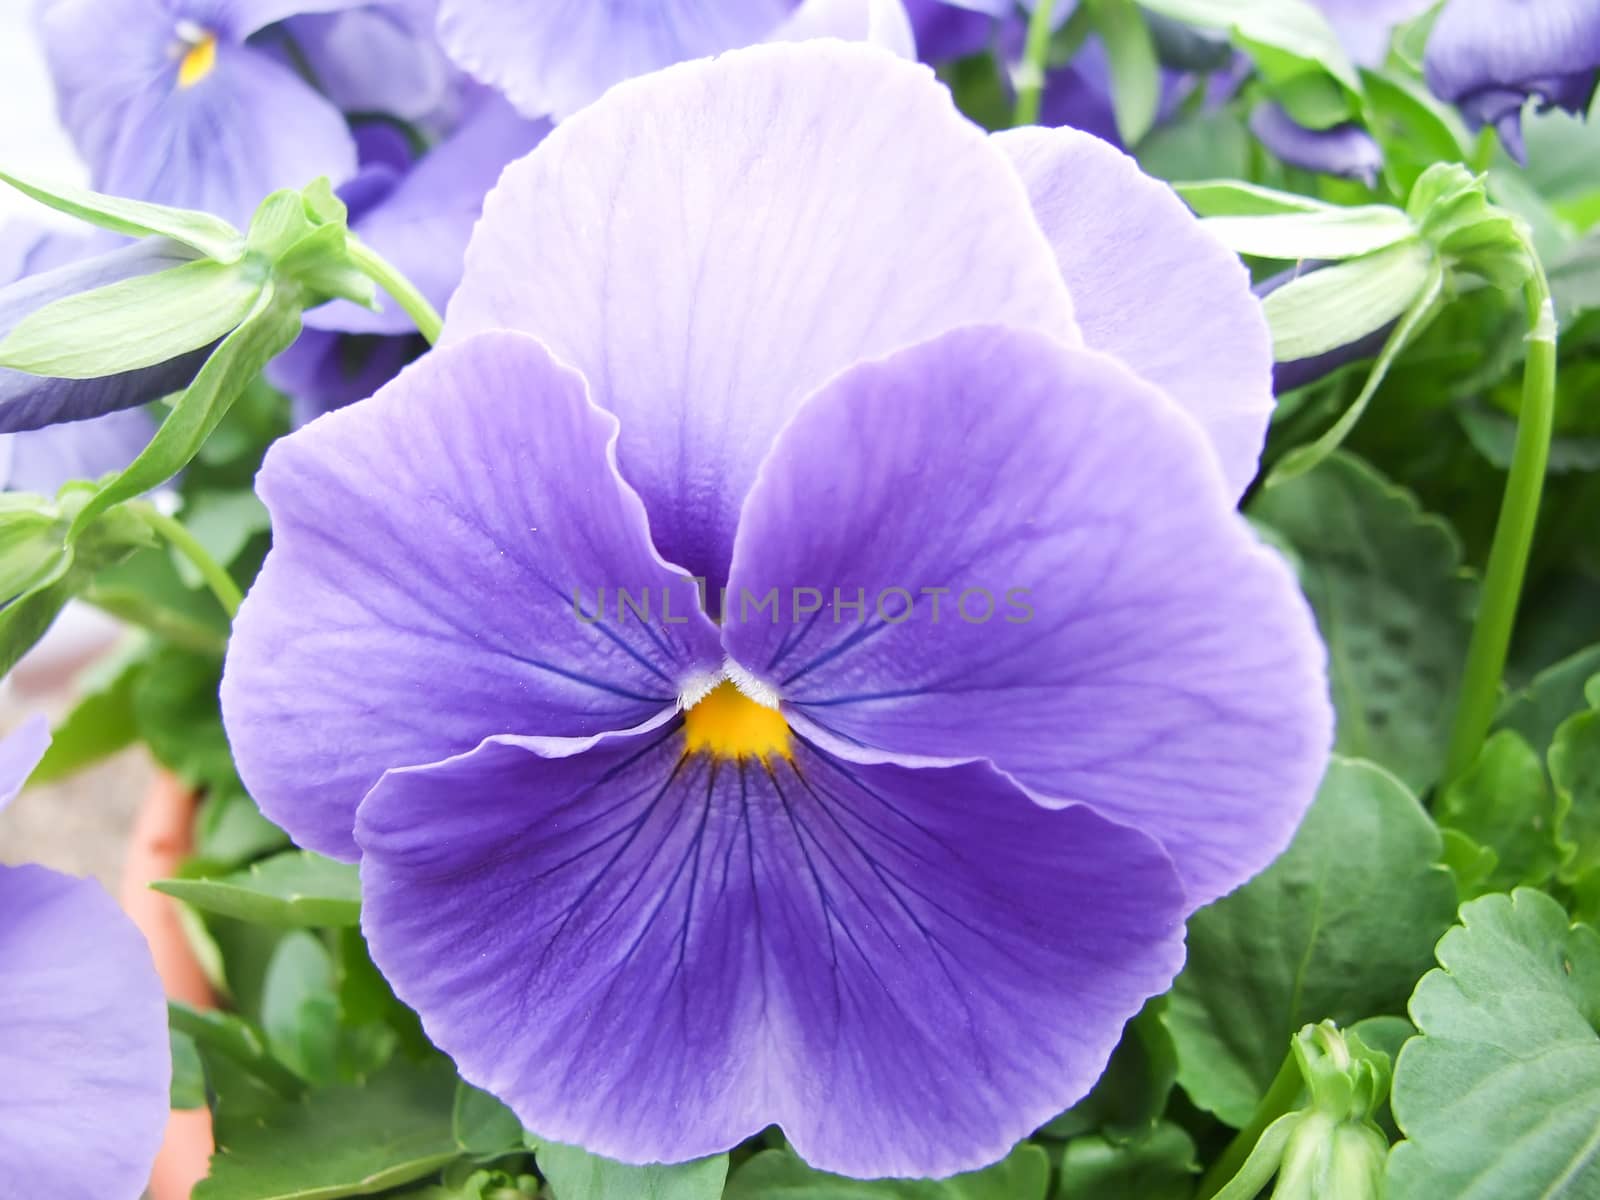 Blue Flower Pansies closeup of colorful pansy flower with yellow center, flower pot plant.